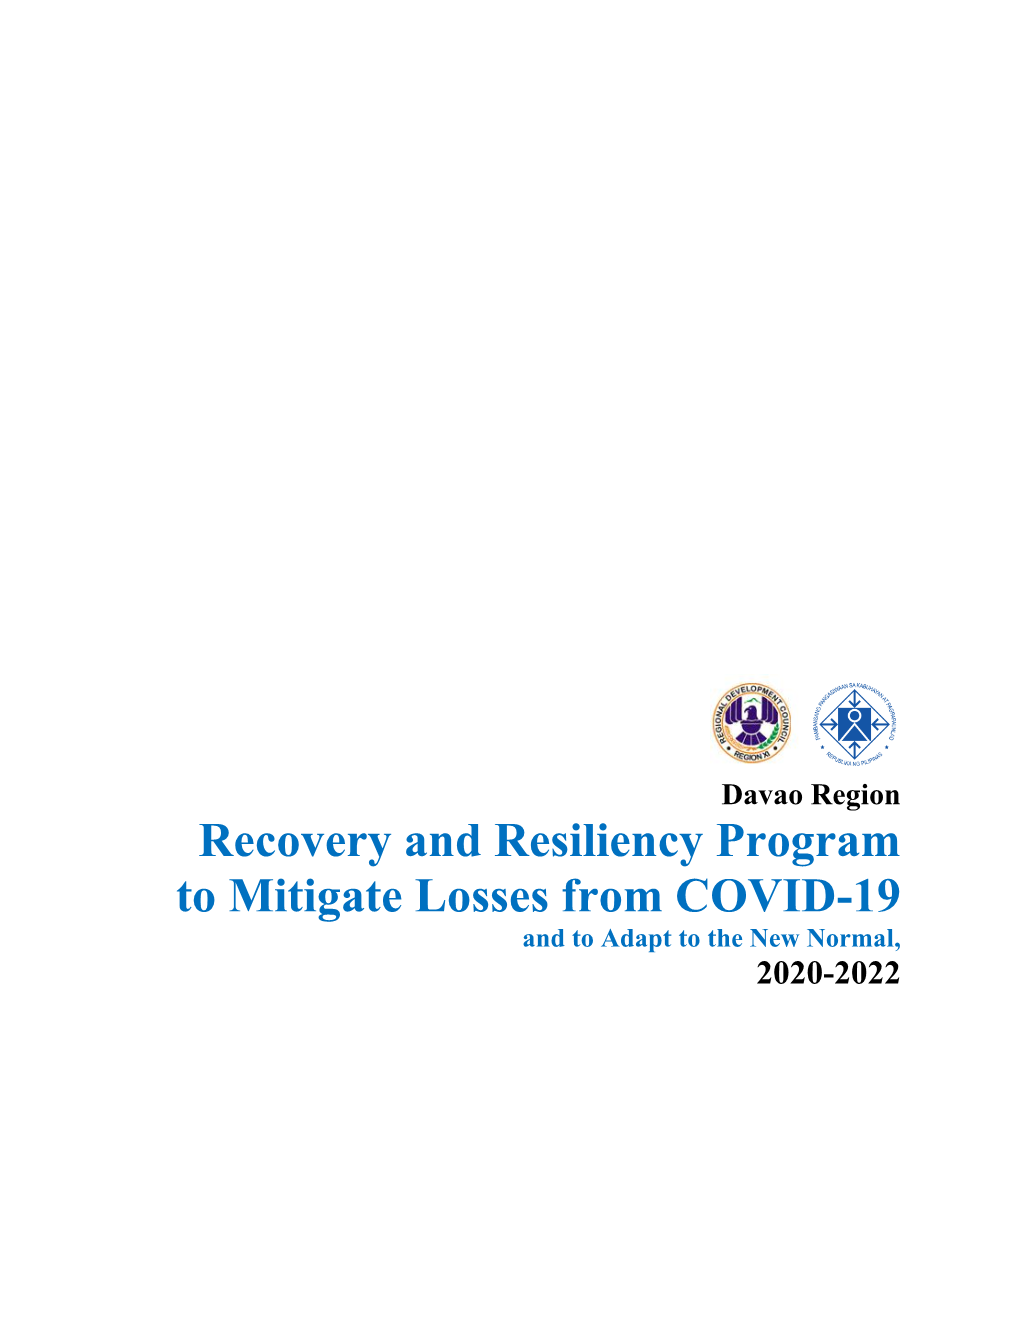 Recovery and Resiliency Program to Mitigate Losses from COVID-19 and to Adapt to the New Normal, 2020-2022